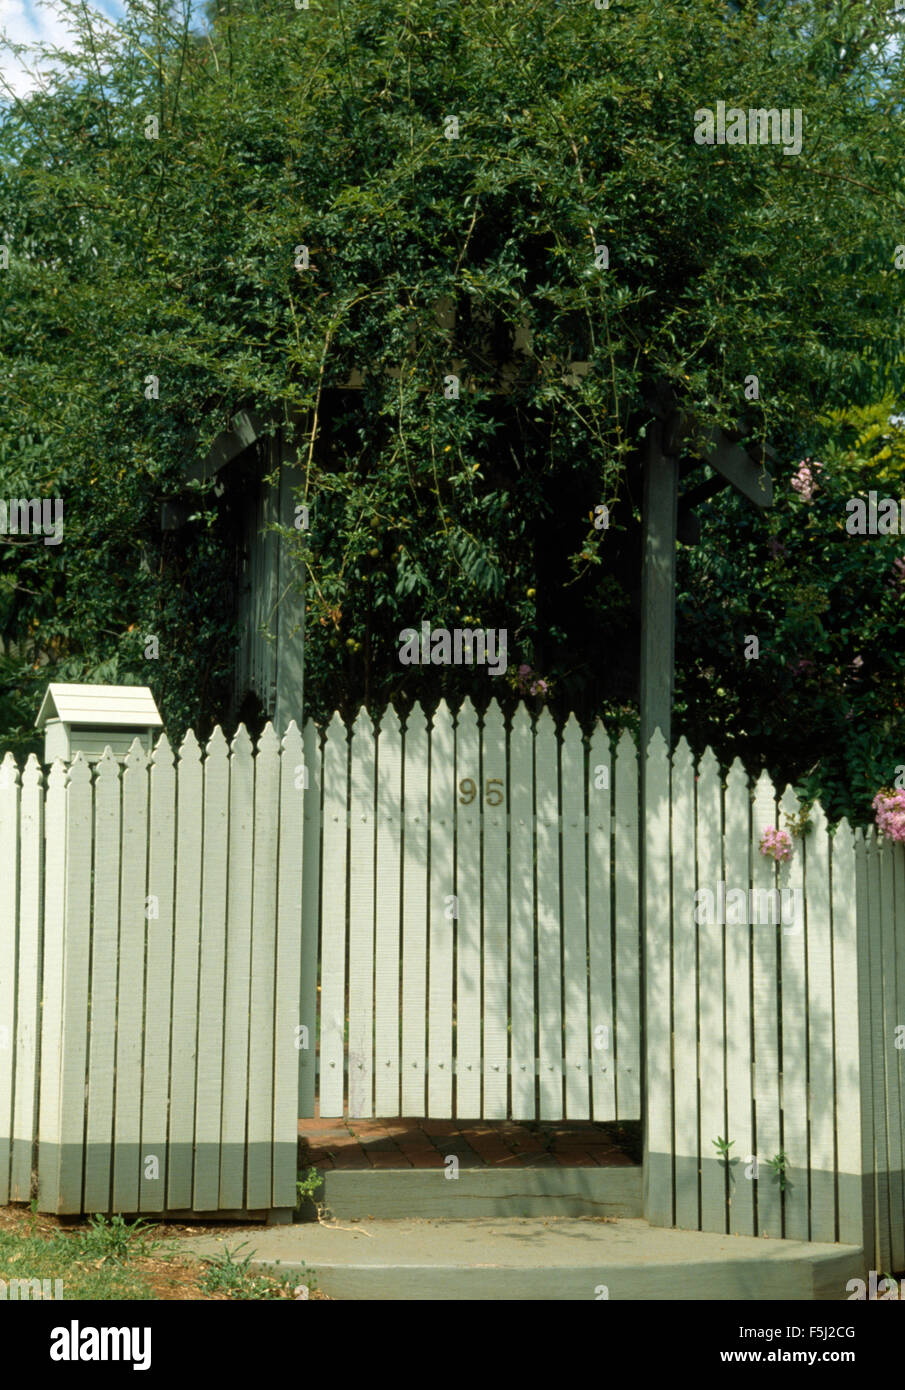 White wooden picket fence in a front garden Stock Photo